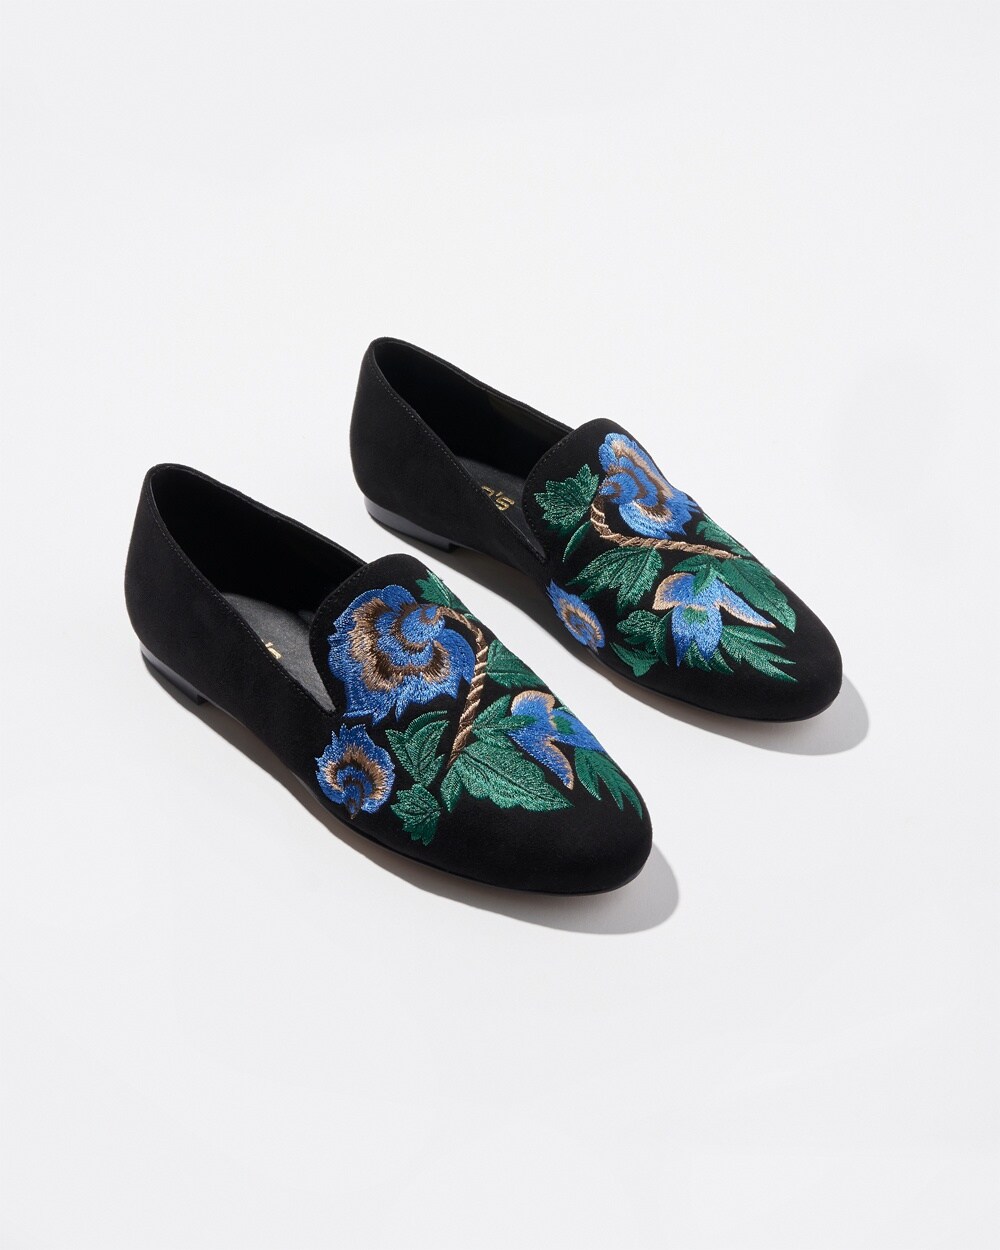 Vegan Suede Floral Embroidered Loafers